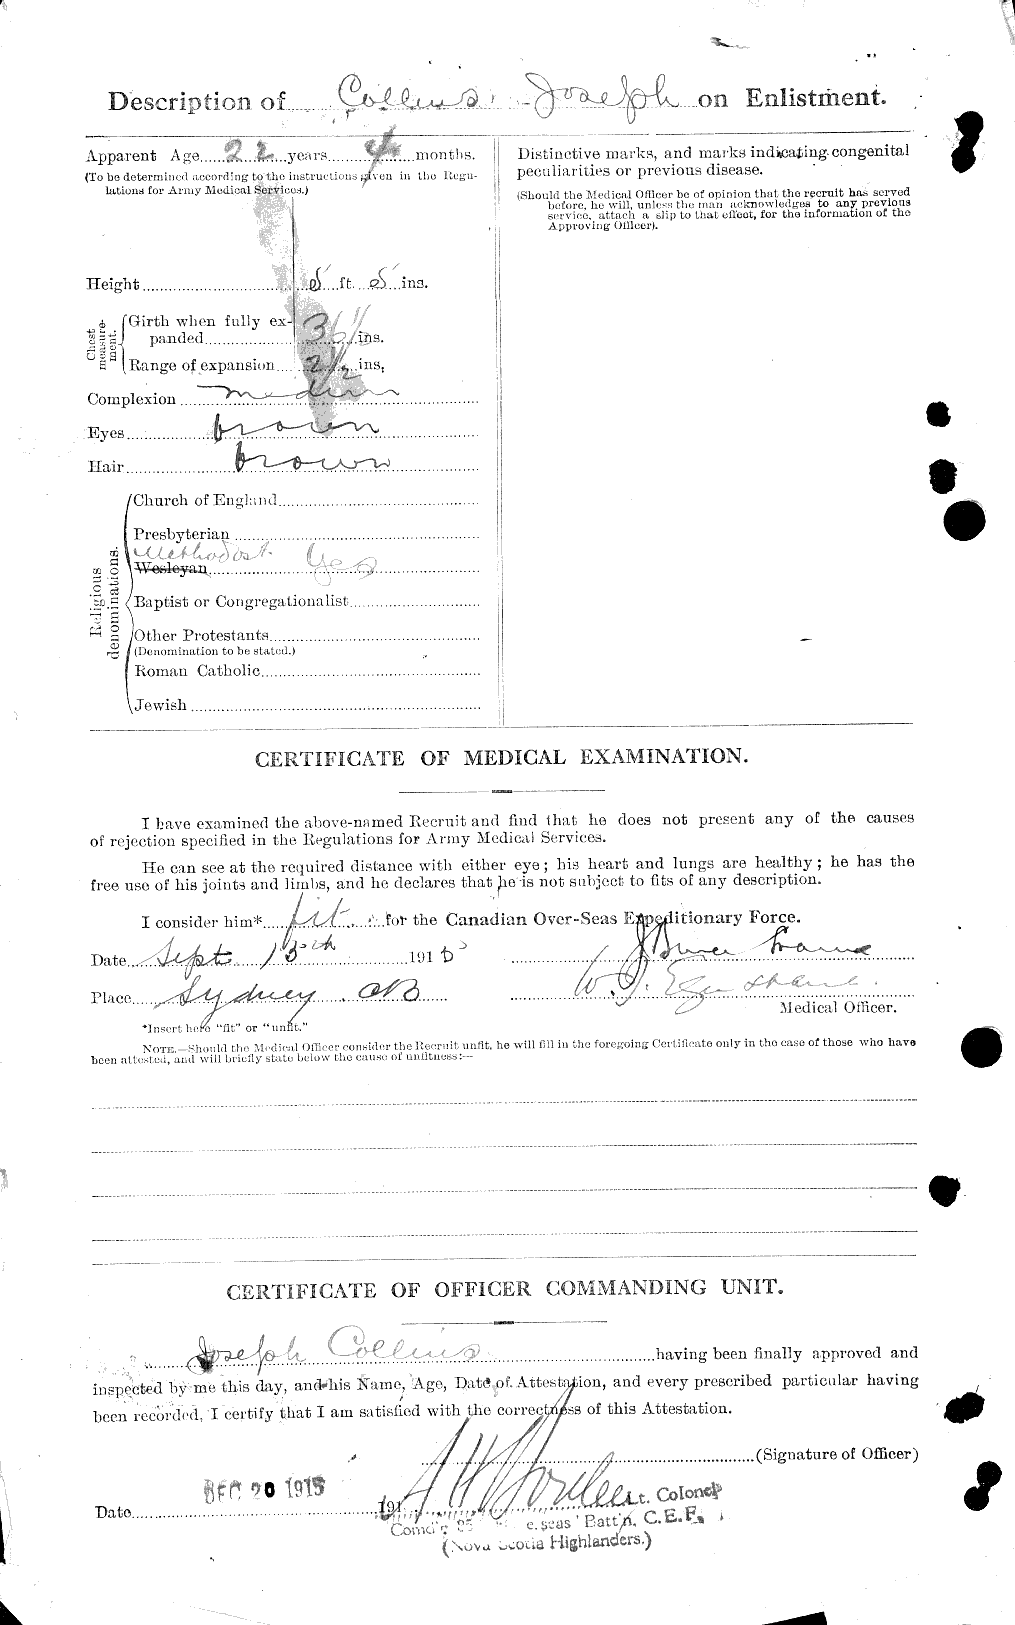 Personnel Records of the First World War - CEF 034398b